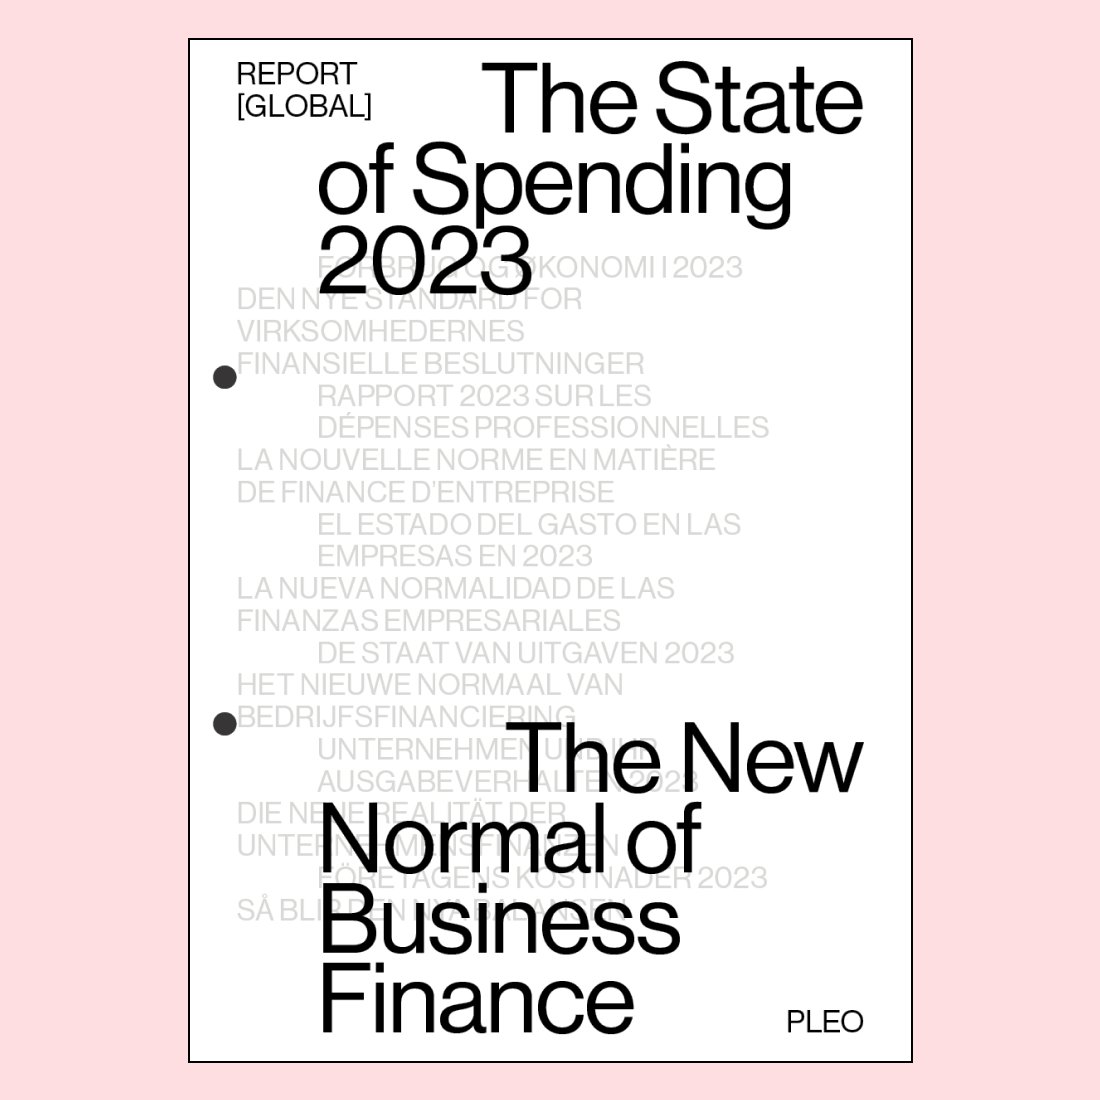 2022 was tough, but we have cause to be hopeful 🤝

Our state of spending report combines insights from 3,500+ senior decision-makers on how they’re navigating new spending habits, workplace changes and cultural shifts

Read the full report here 👉 https://t.co/4Aq5PJOSeP https://t.co/BxQzotX9Td